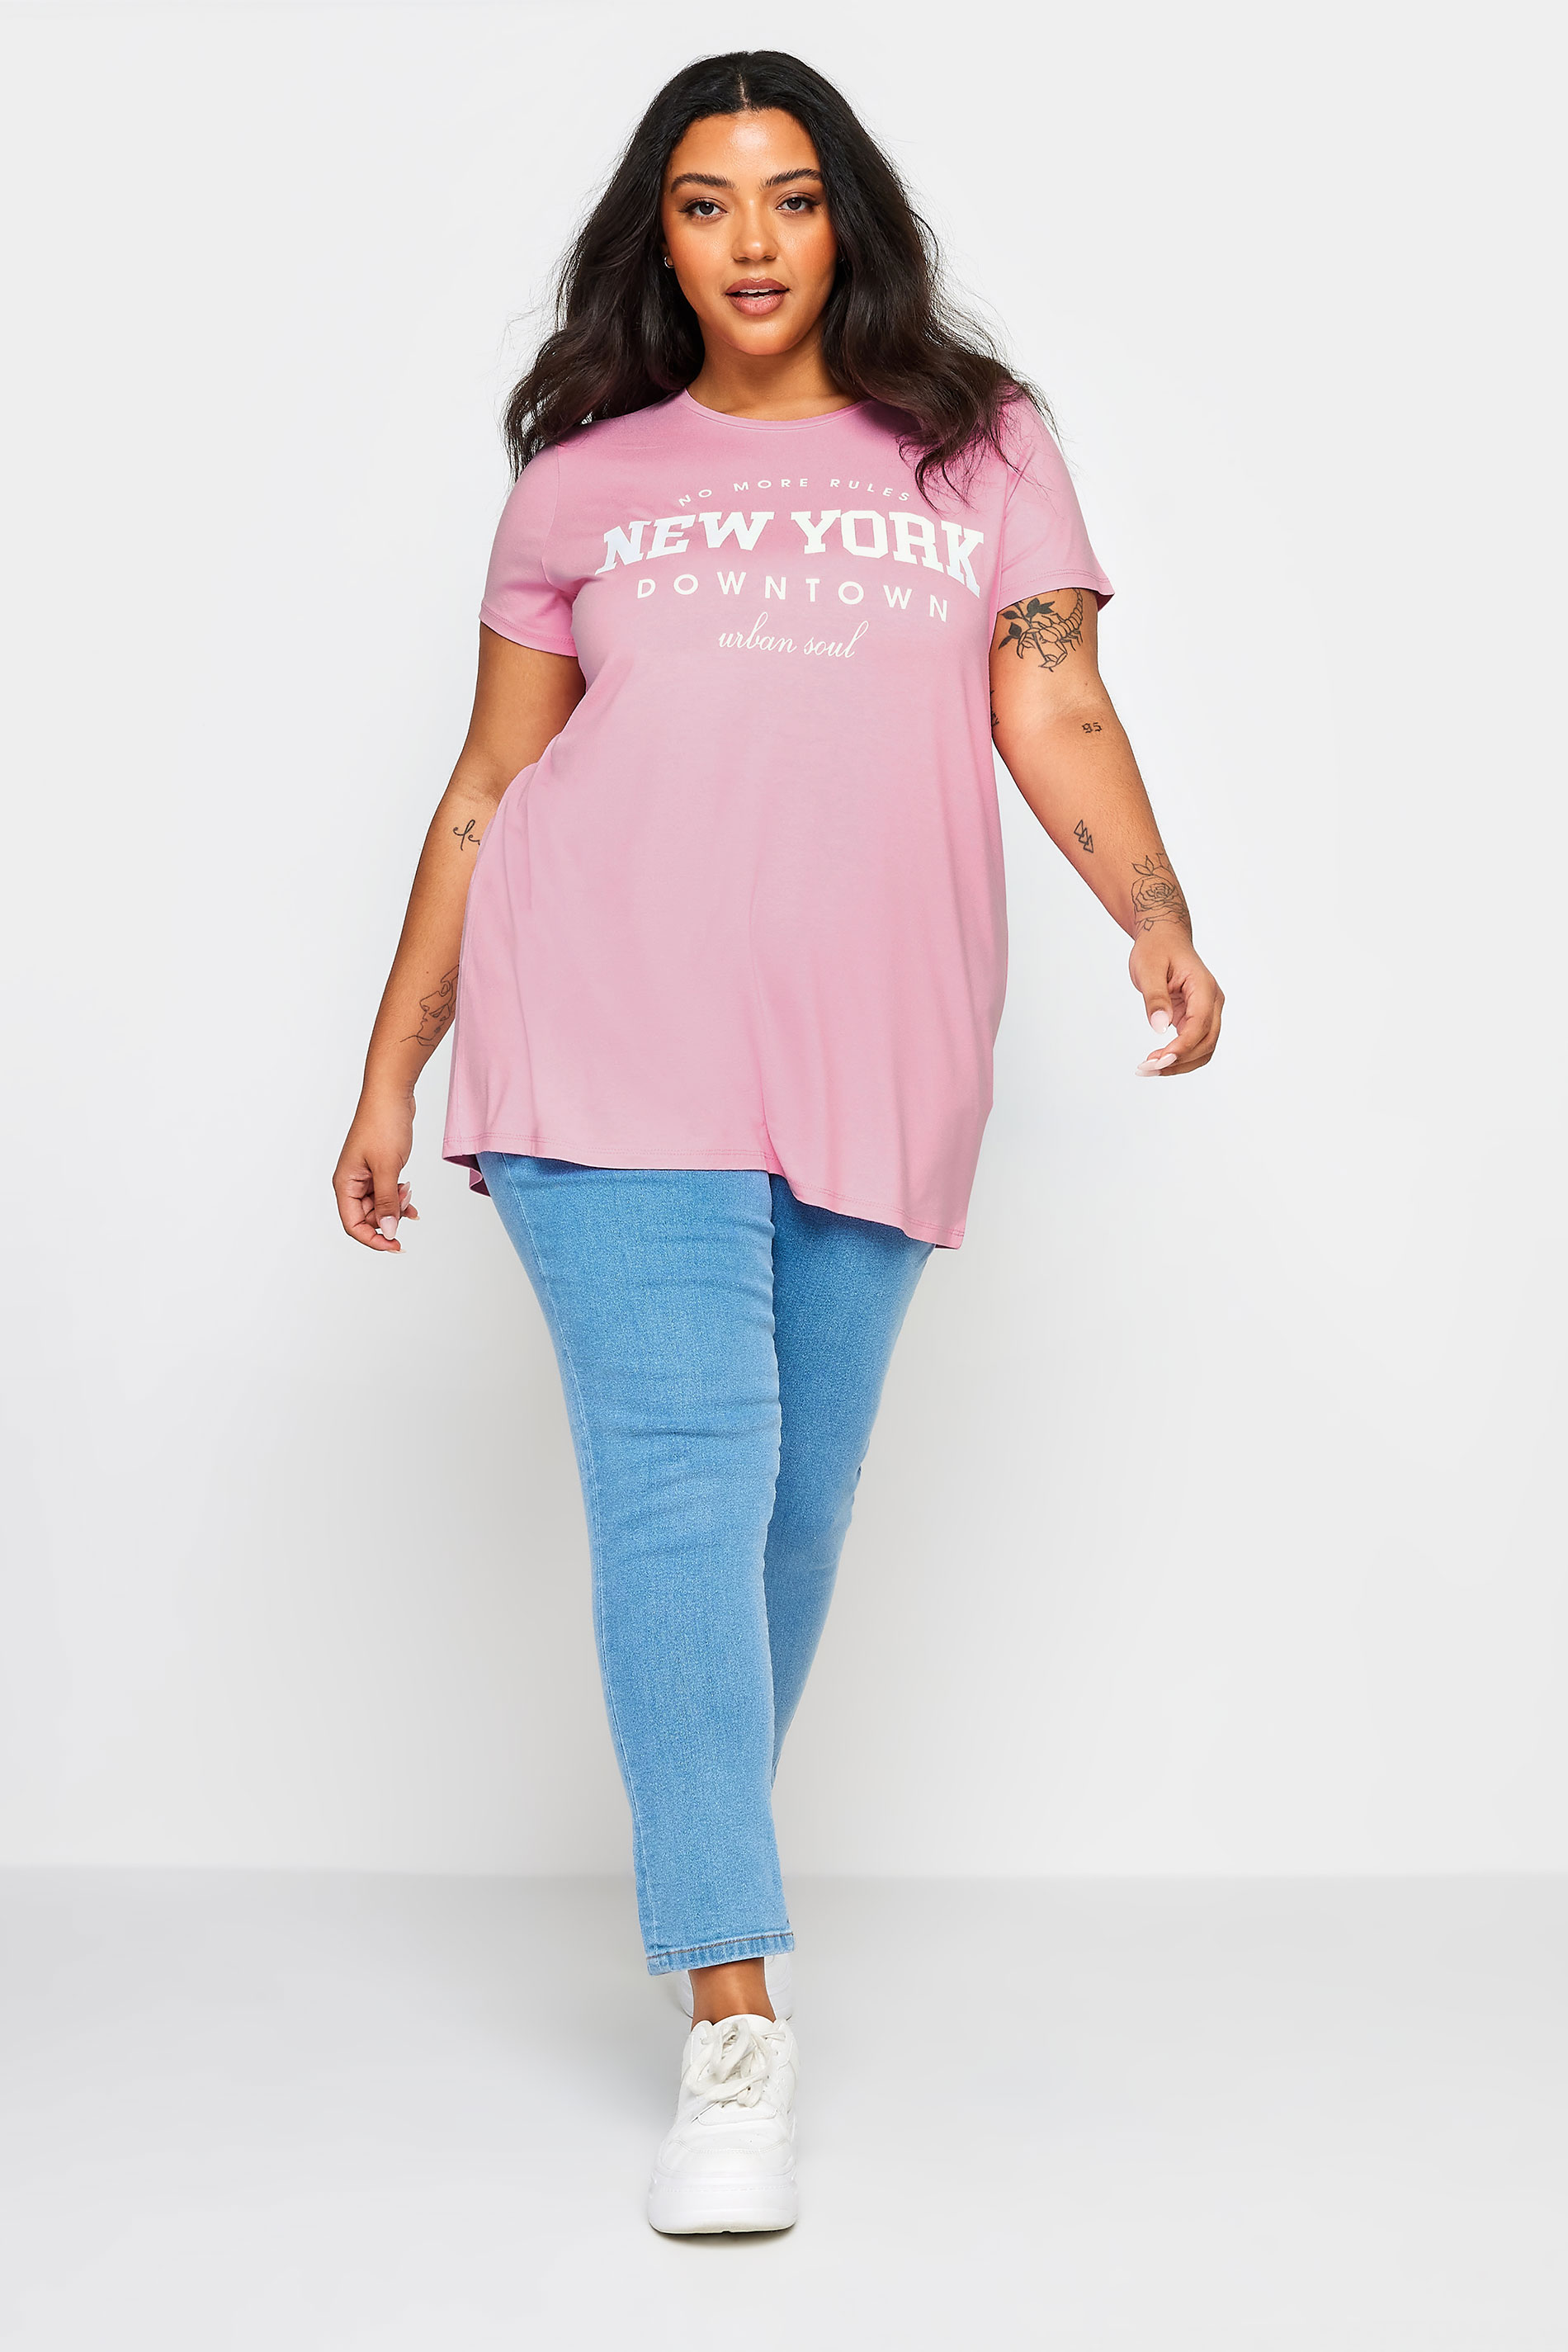 YOURS Plus Size Pink 'New York' Slogan T-Shirt | Yours Clothing 2